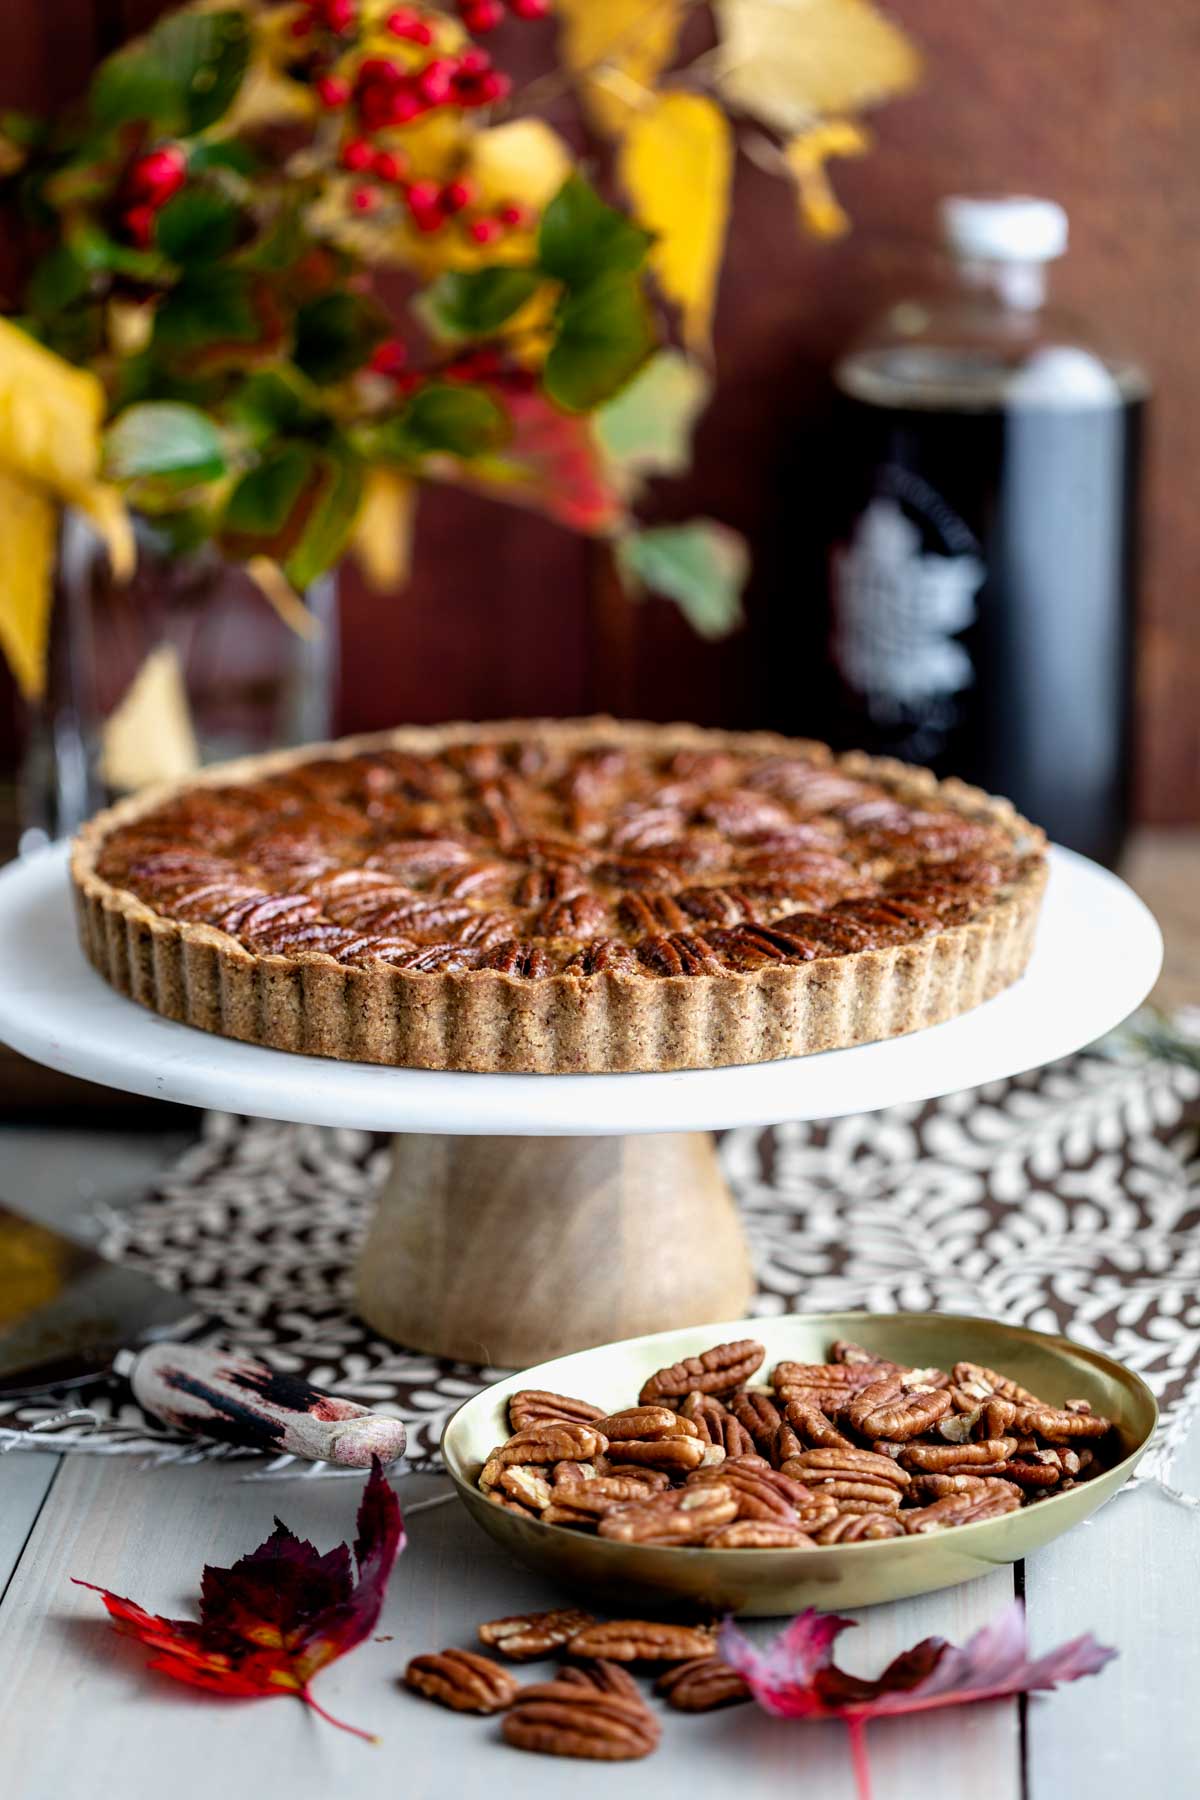 side view of the tart on a tart stand with fall floral arrangement in background